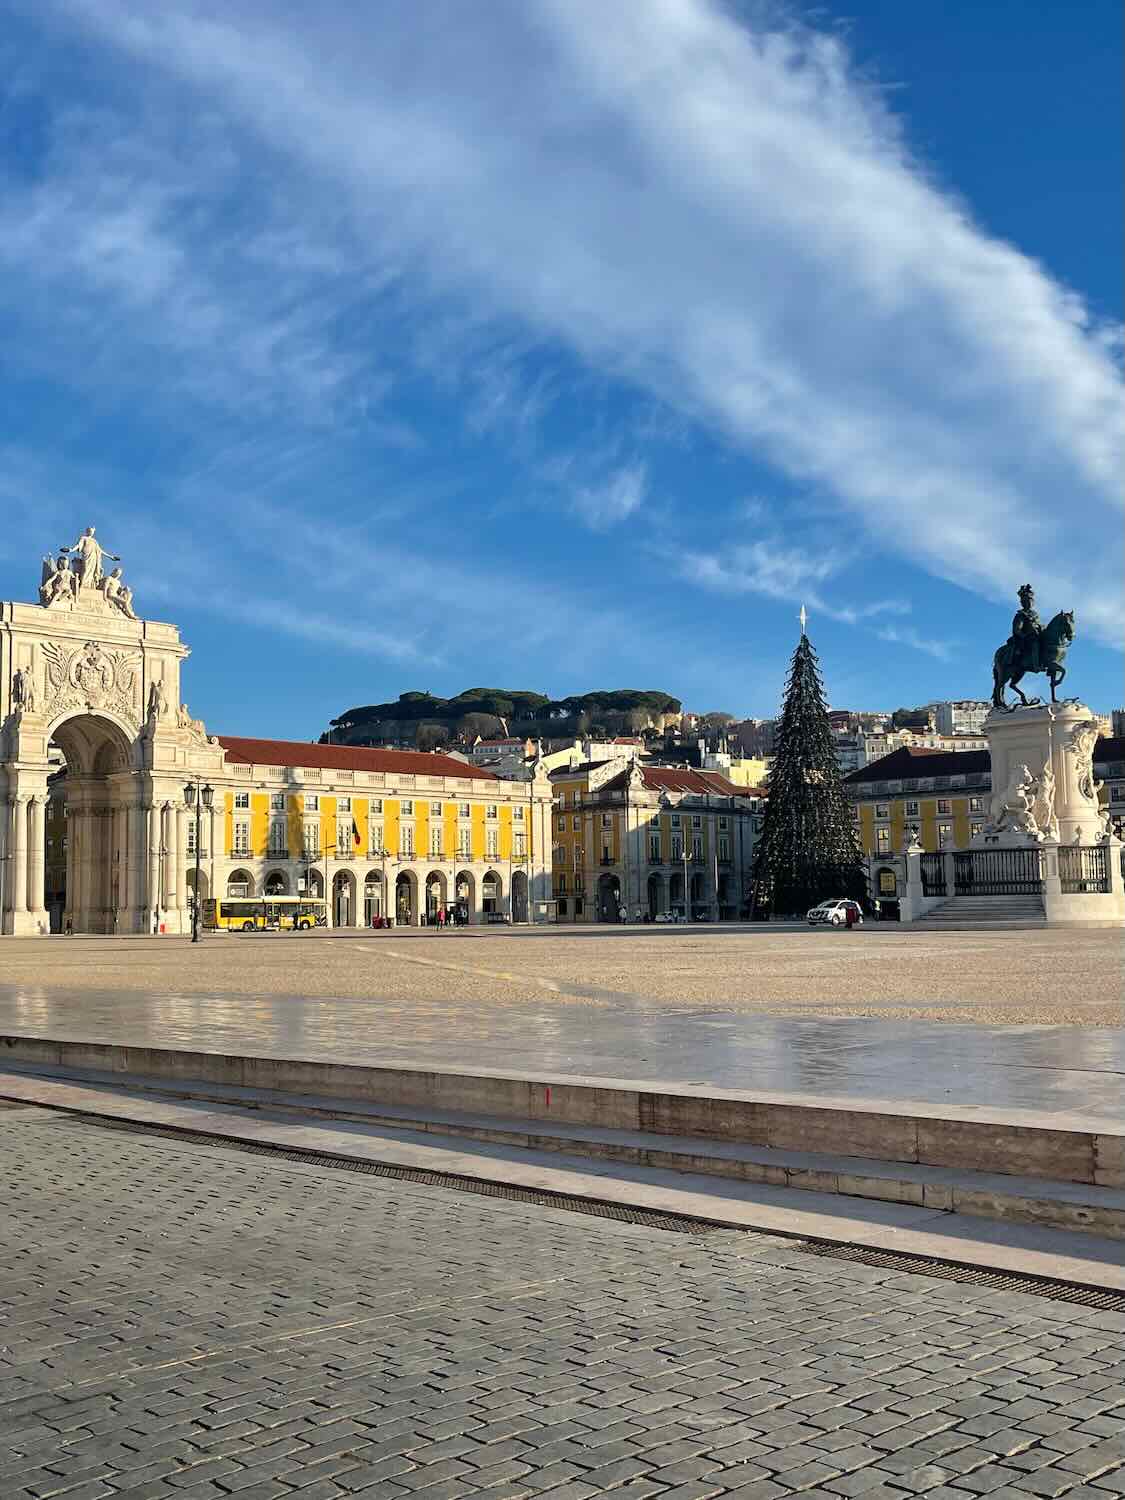 "Praça do Comércio

in Lisbon during winter, with a large Christmas tree set up in the square, the triumphal arch in the background, and a clear blue sky above.